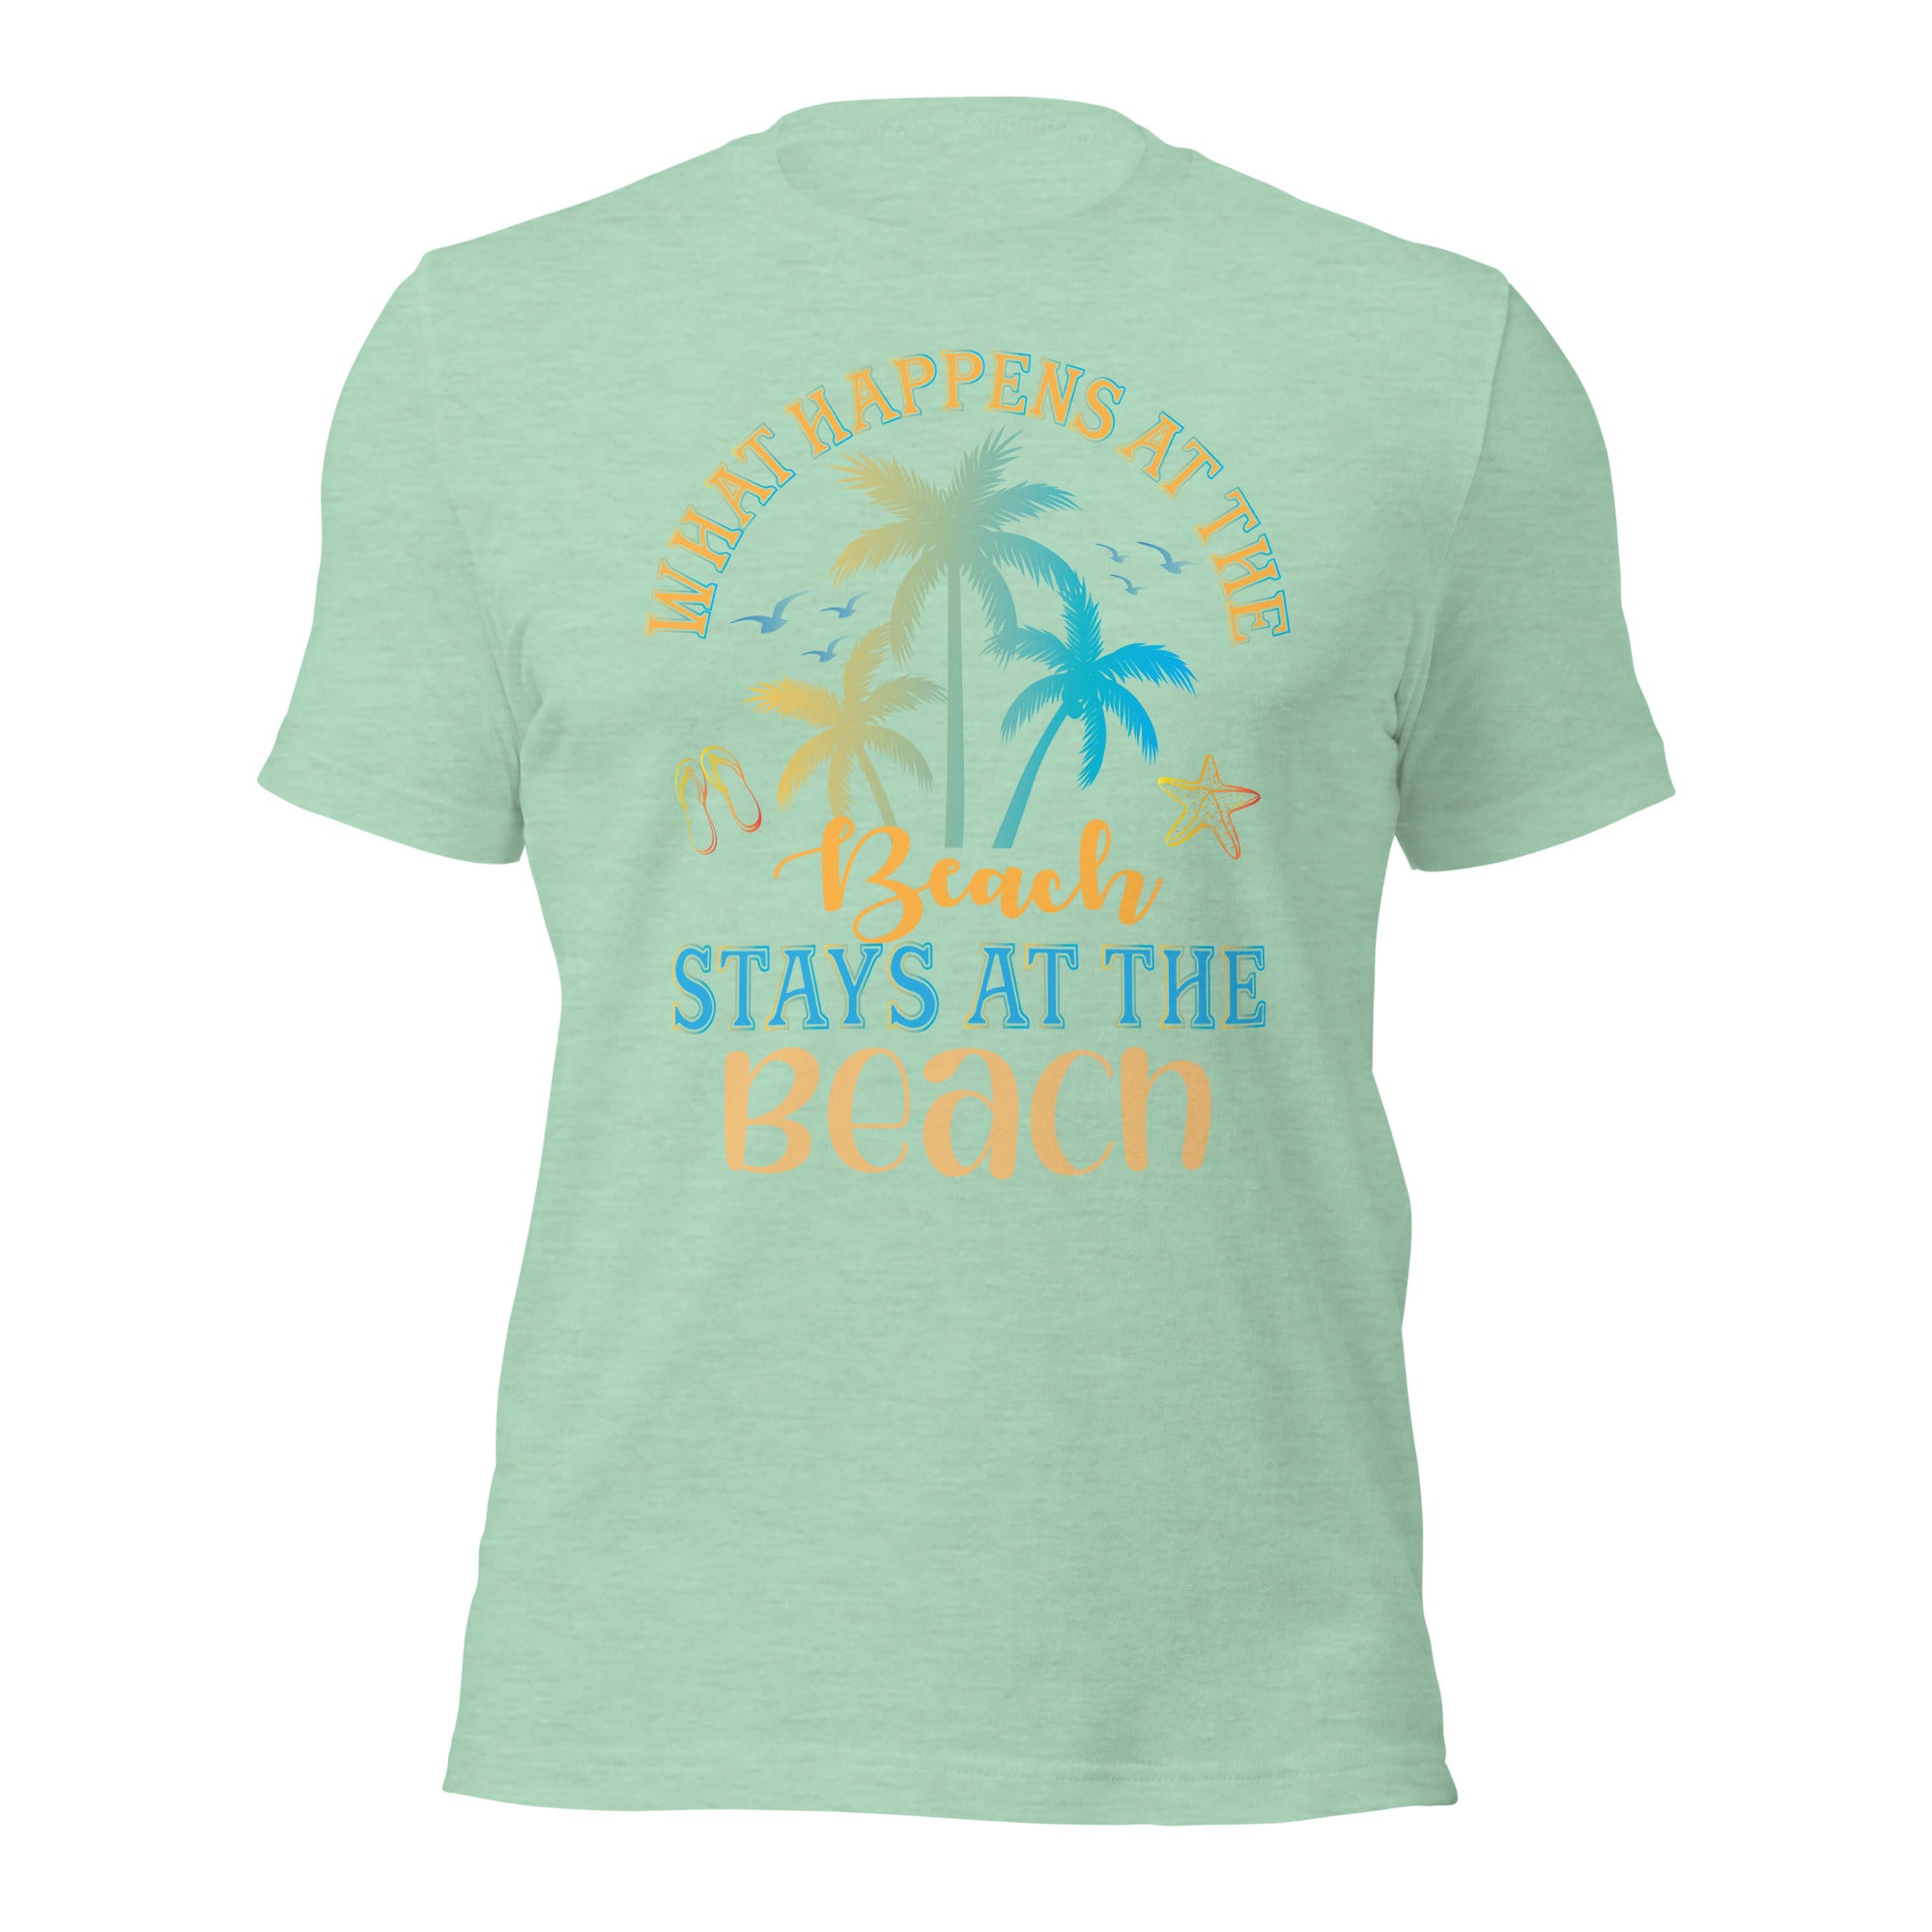 What Happens At the Beach Stays At the Beach T-Shirt